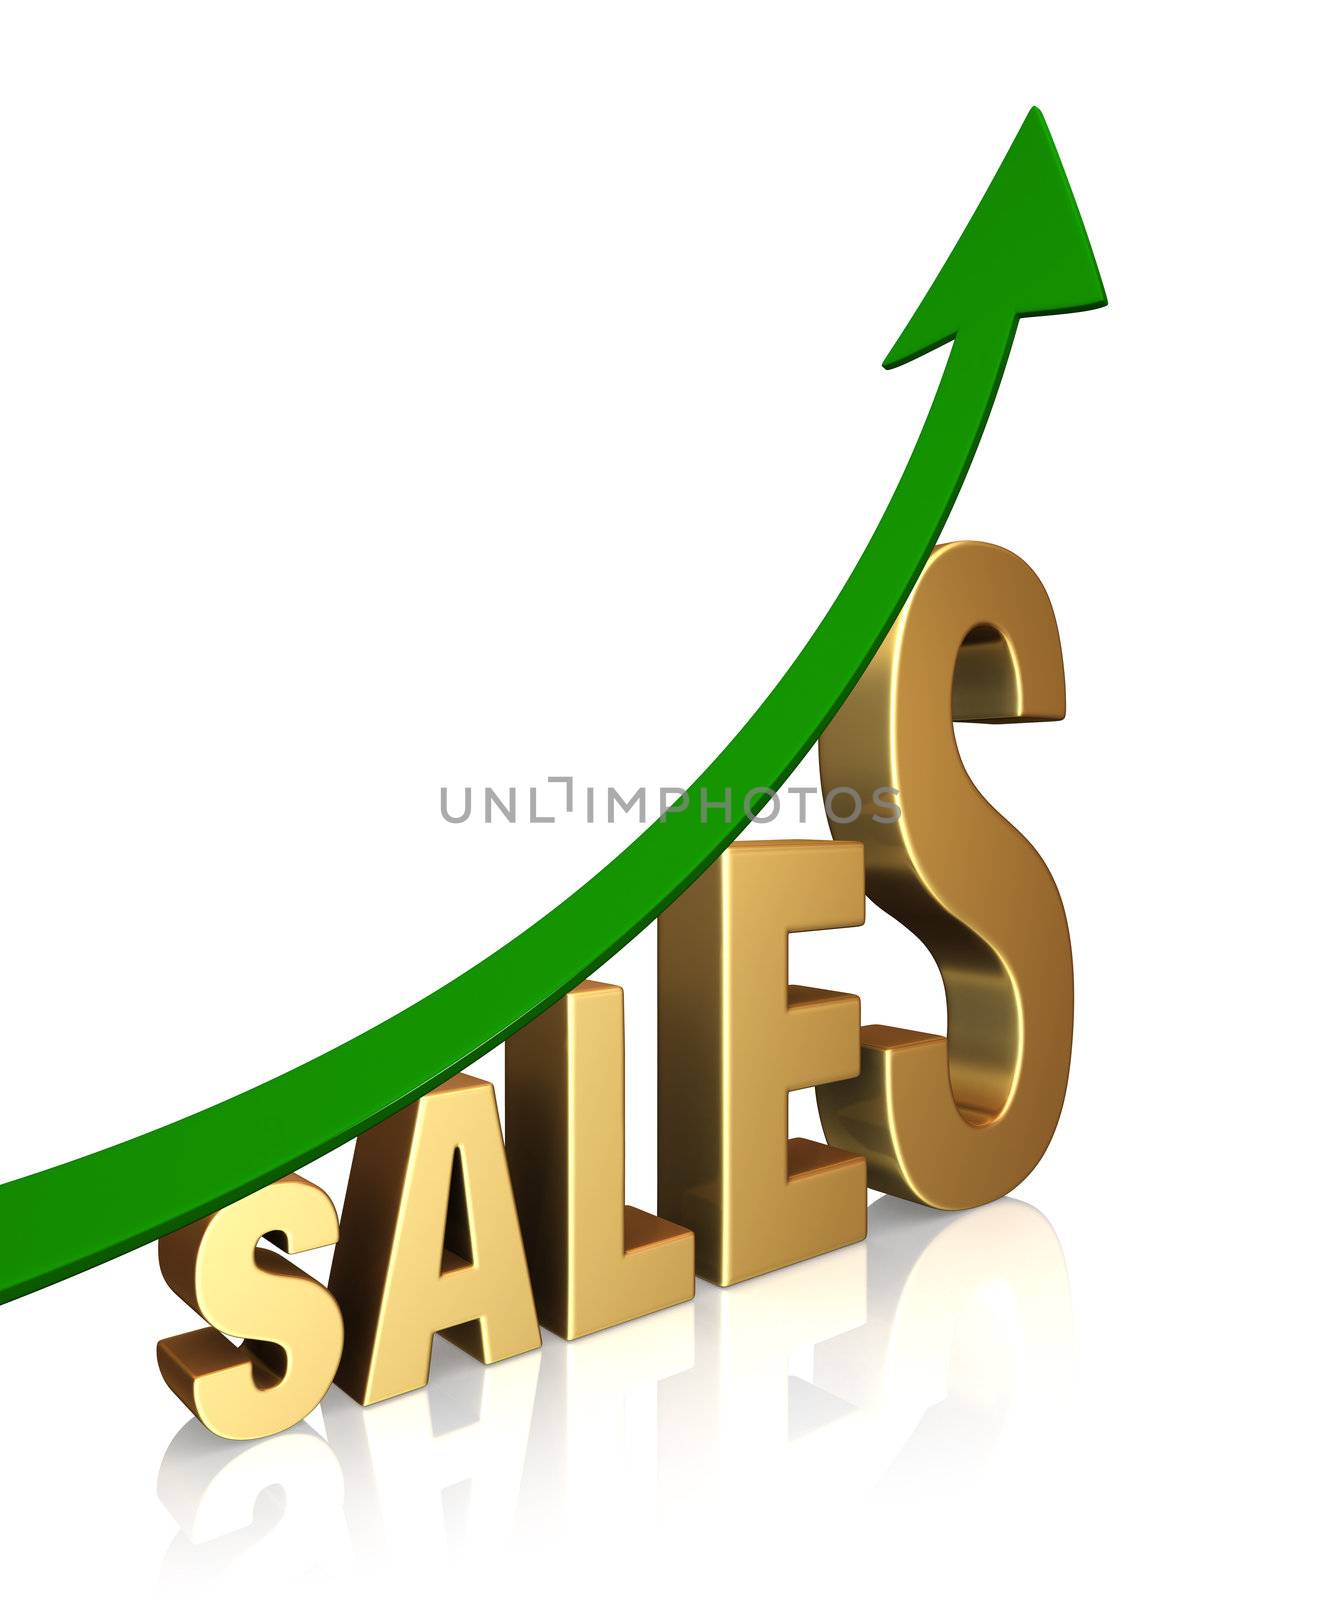 Sales Are Up! by Em3